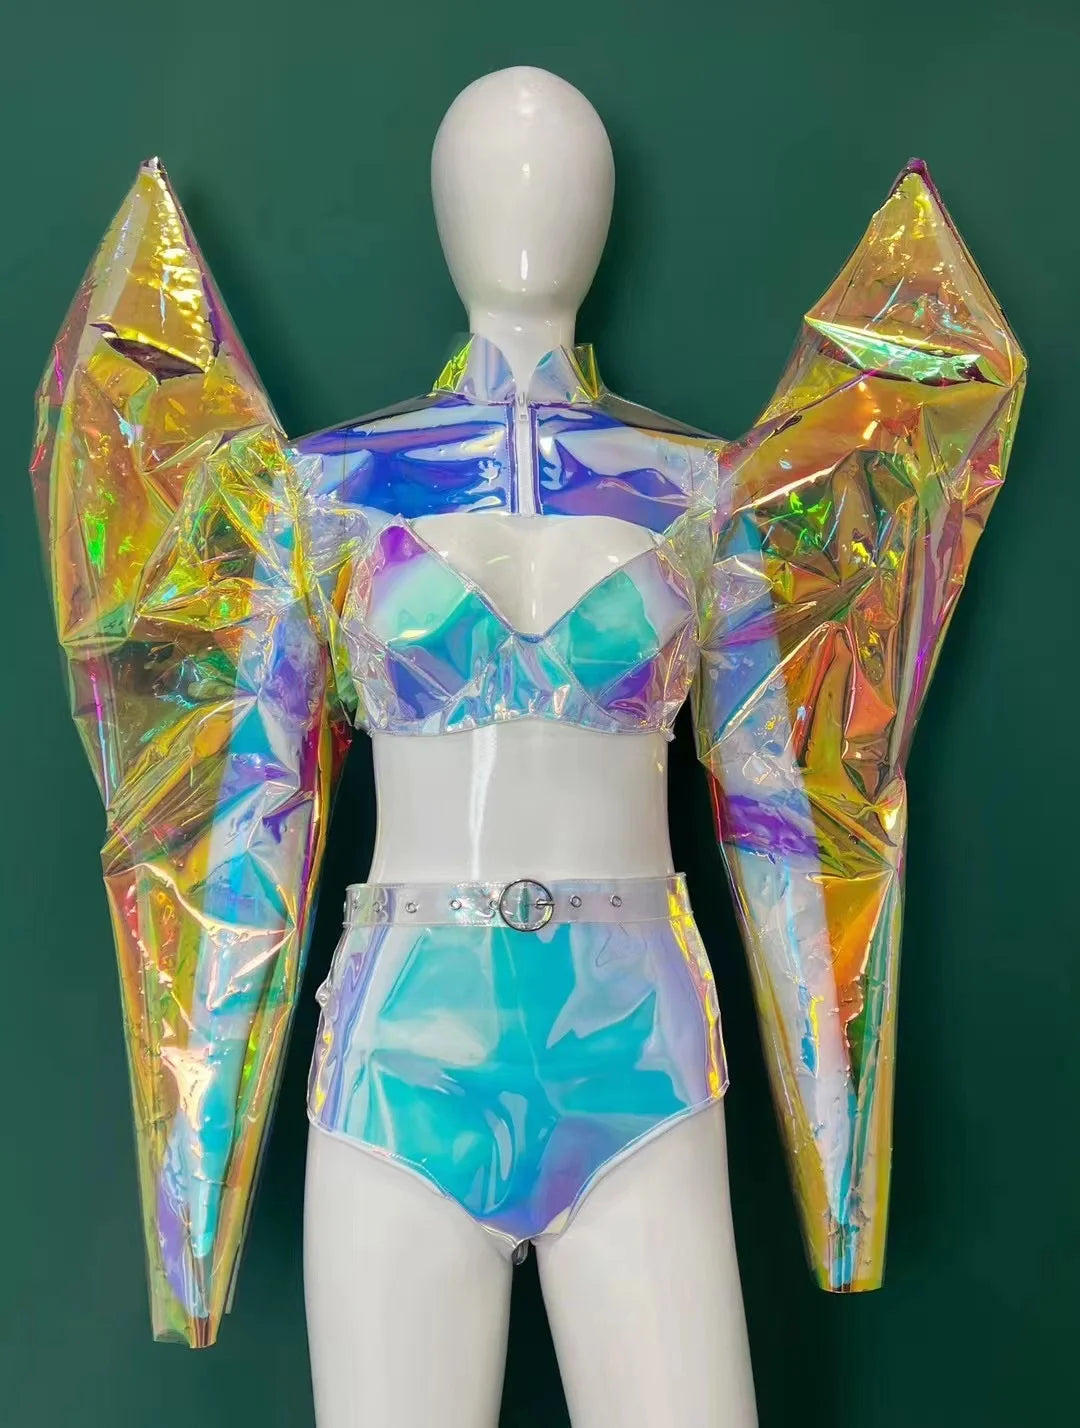 A mannequin dressed in a Maramalive™ ArmorCoat +Bikini Outfit Fantasy Armor Laser Personalized Performance Clothing Nightclub Bar Female Singer Sexy Party Outfit with oversized angular sleeves, a crop top, and high-waisted shorts, stands against a green background.